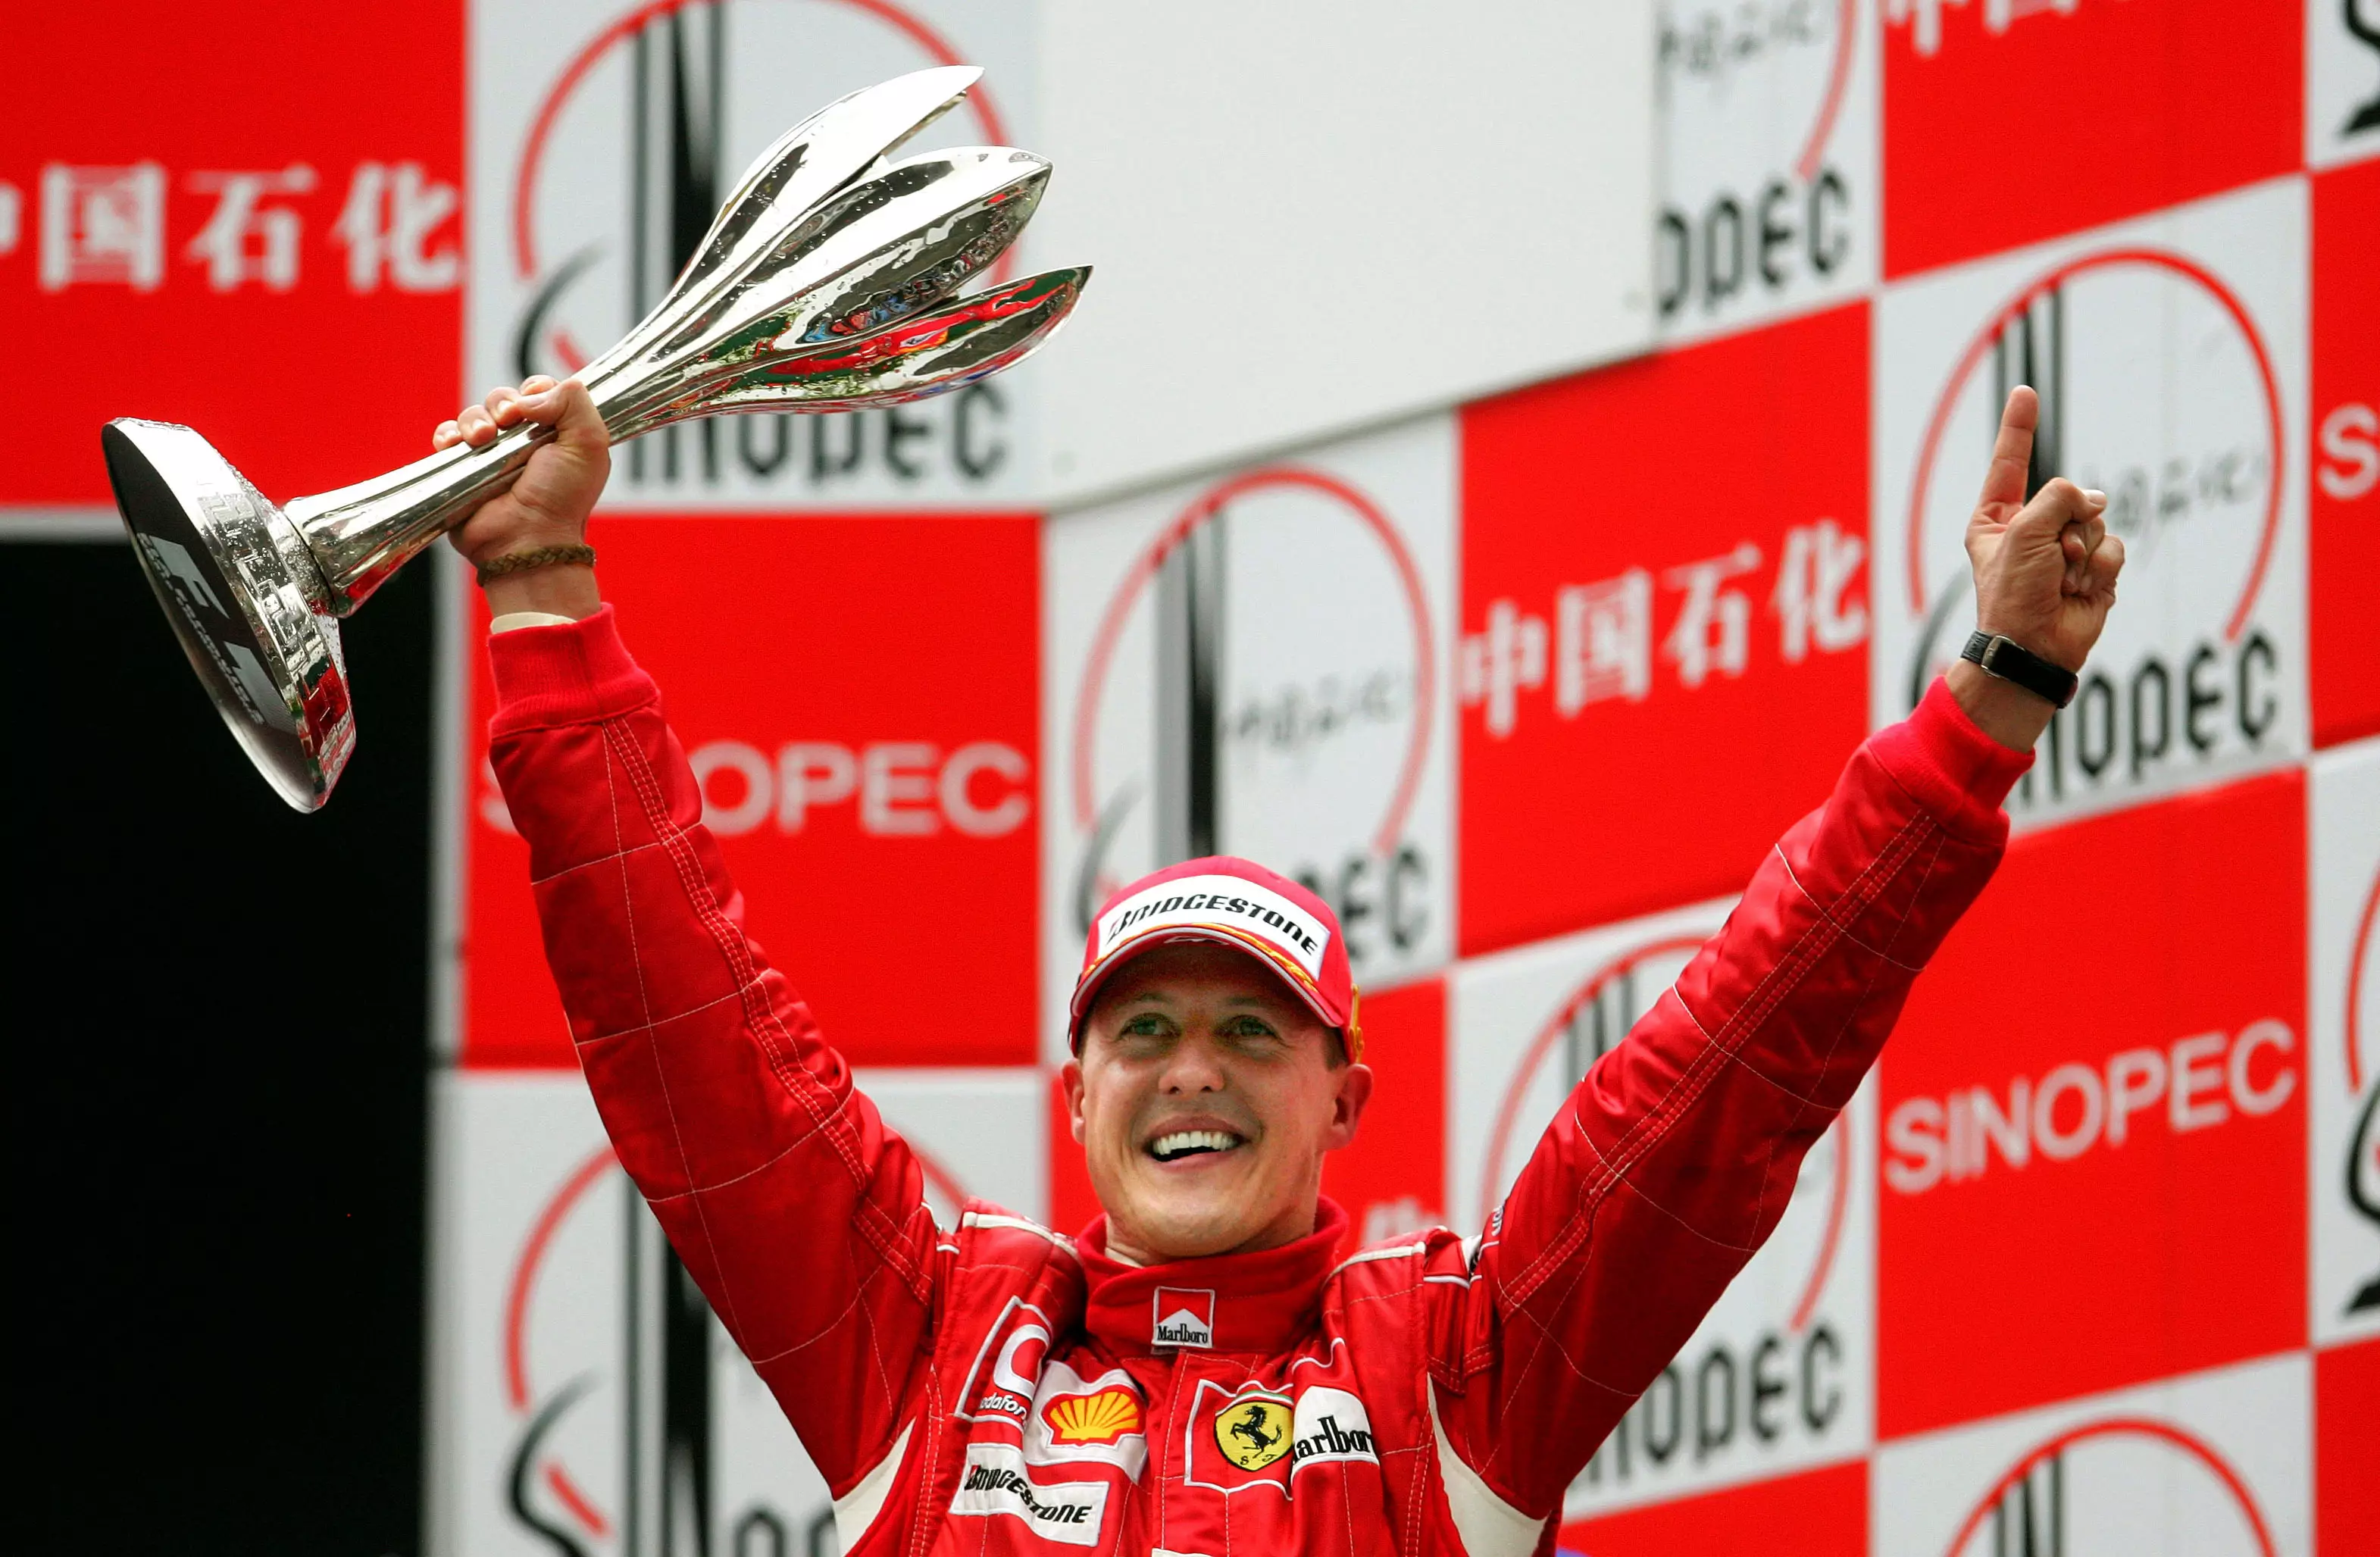 Schumacher celebrates a race win in 2006. Image: PA Images